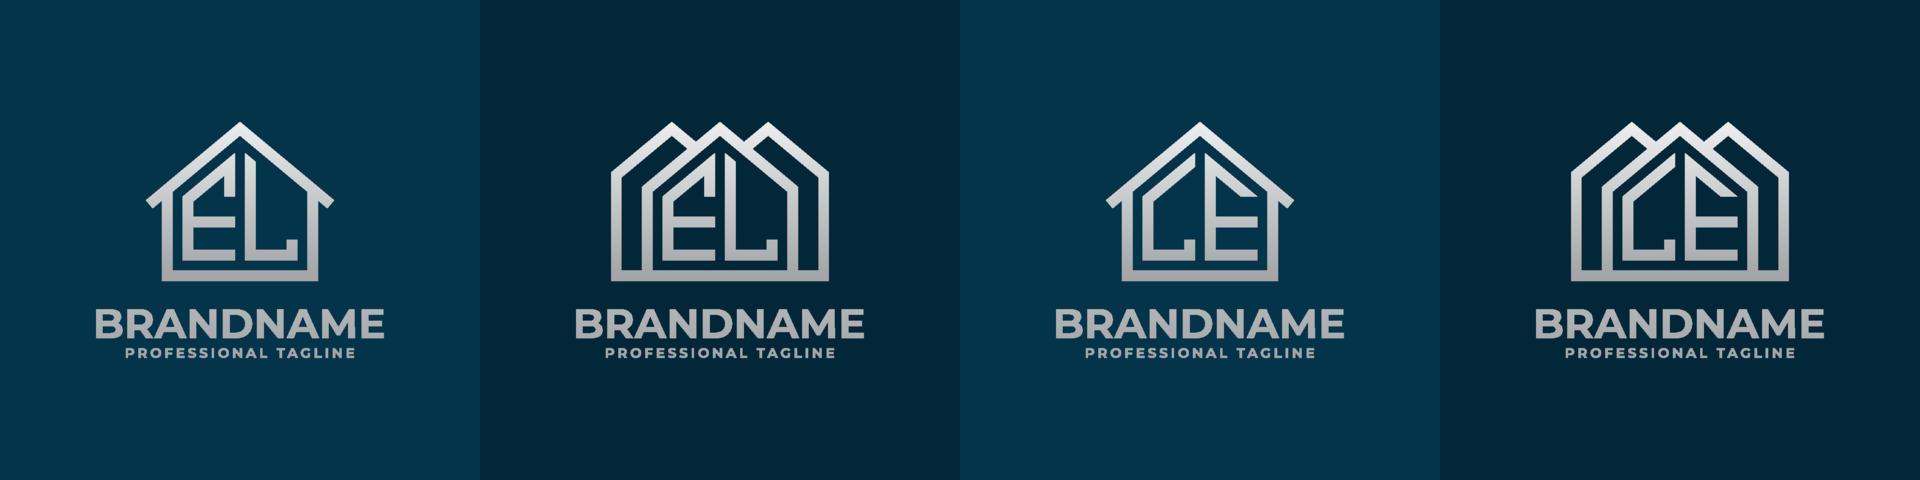 Letter EL and LE Home Logo Set. Suitable for any business related to house, real estate, construction, interior with EL or LE initials. vector